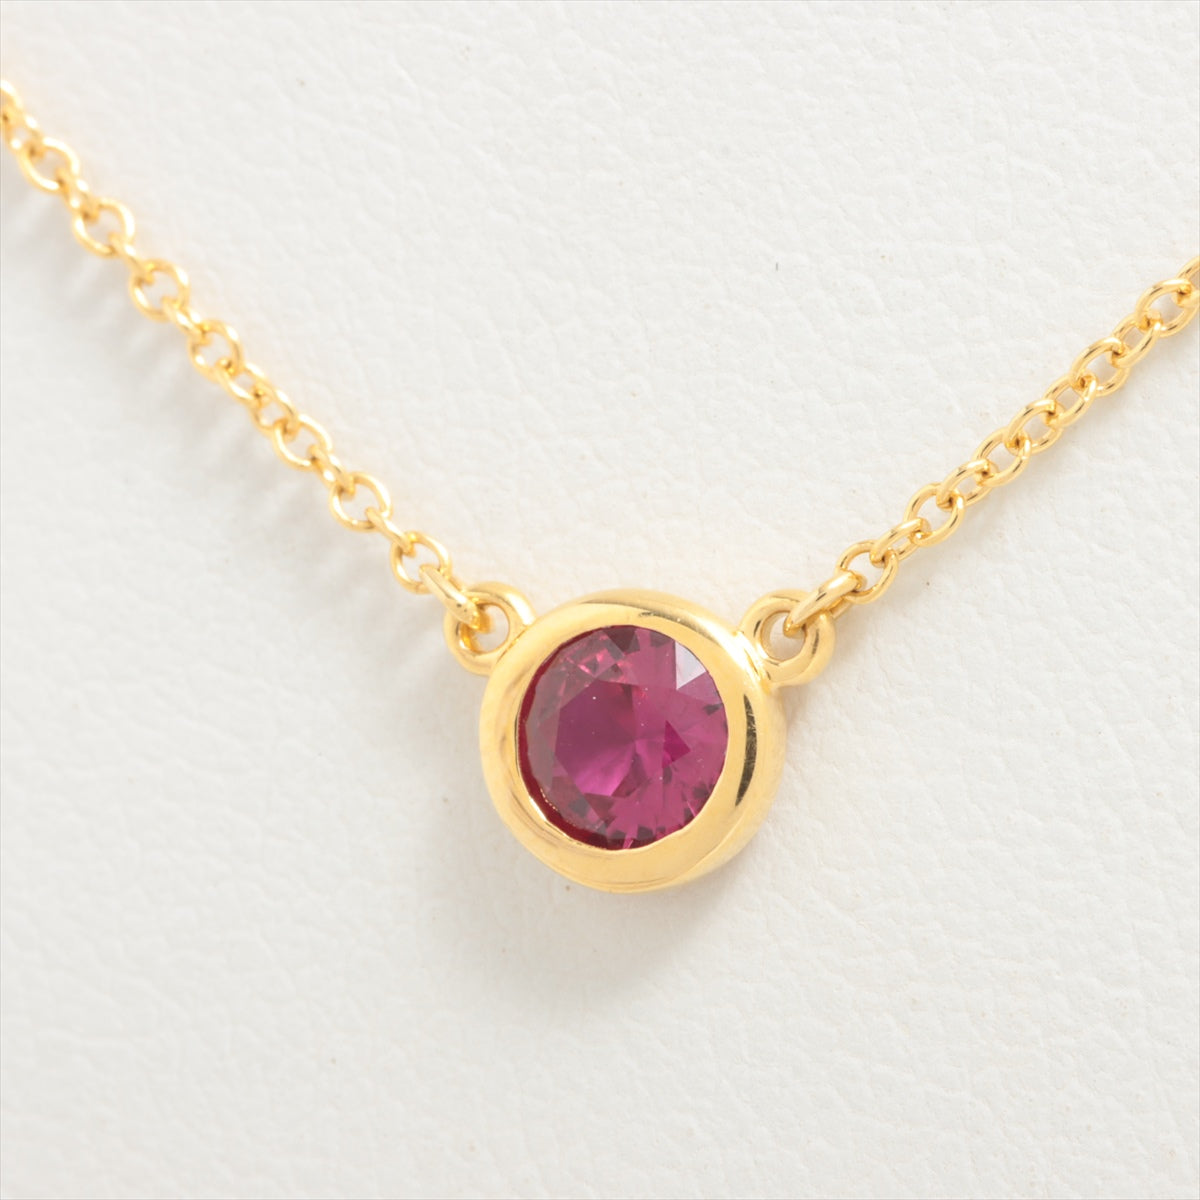 Tiffany Kolor By the Yard Ruby Necklace 750(YG) 2.0g Approximately 5.52 mm in diameter